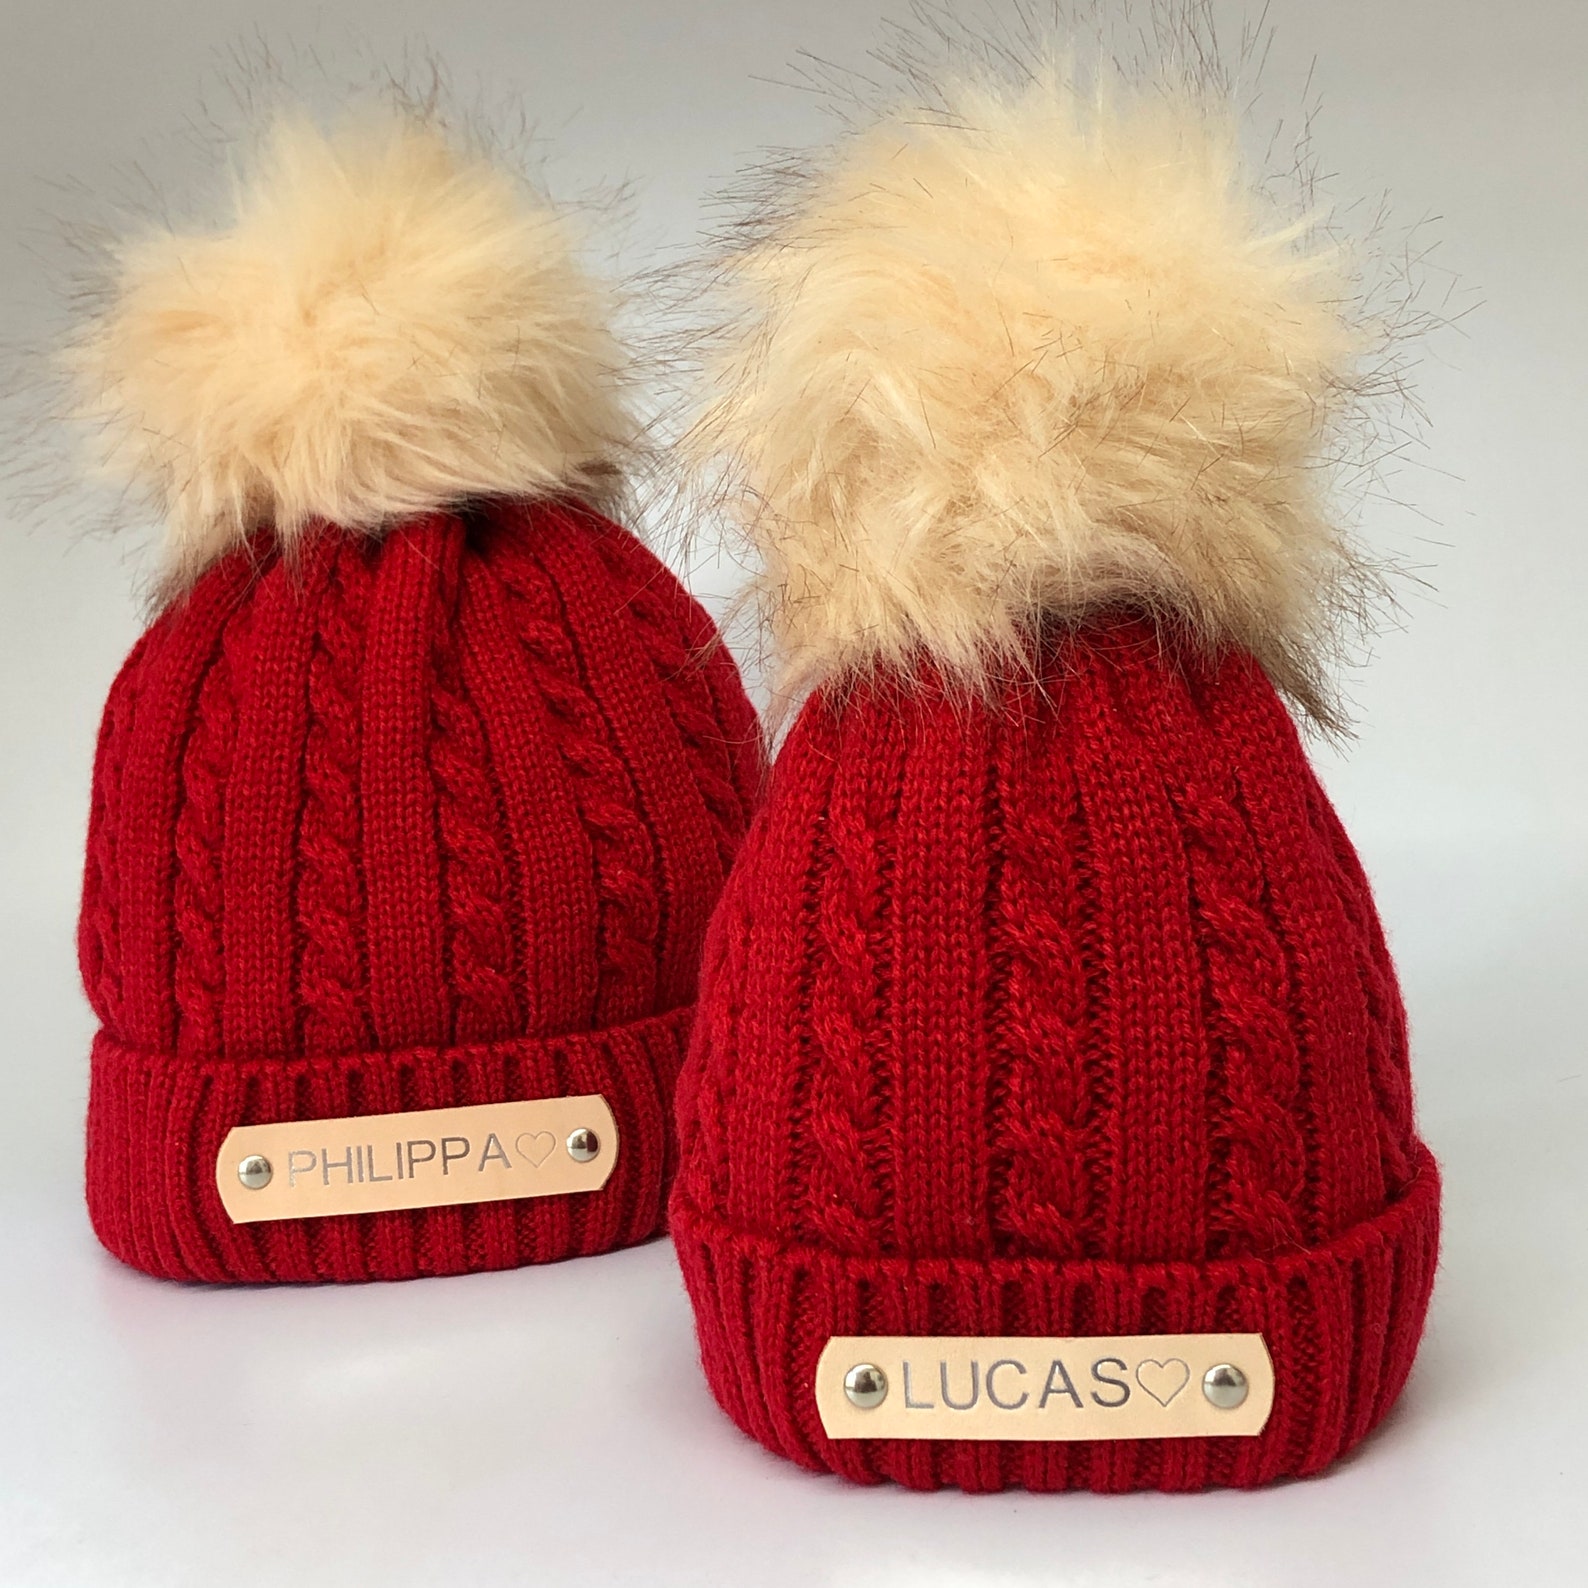 Personalized Name Detachable Pom Pom Hat for Comfort & Unique | INKid13